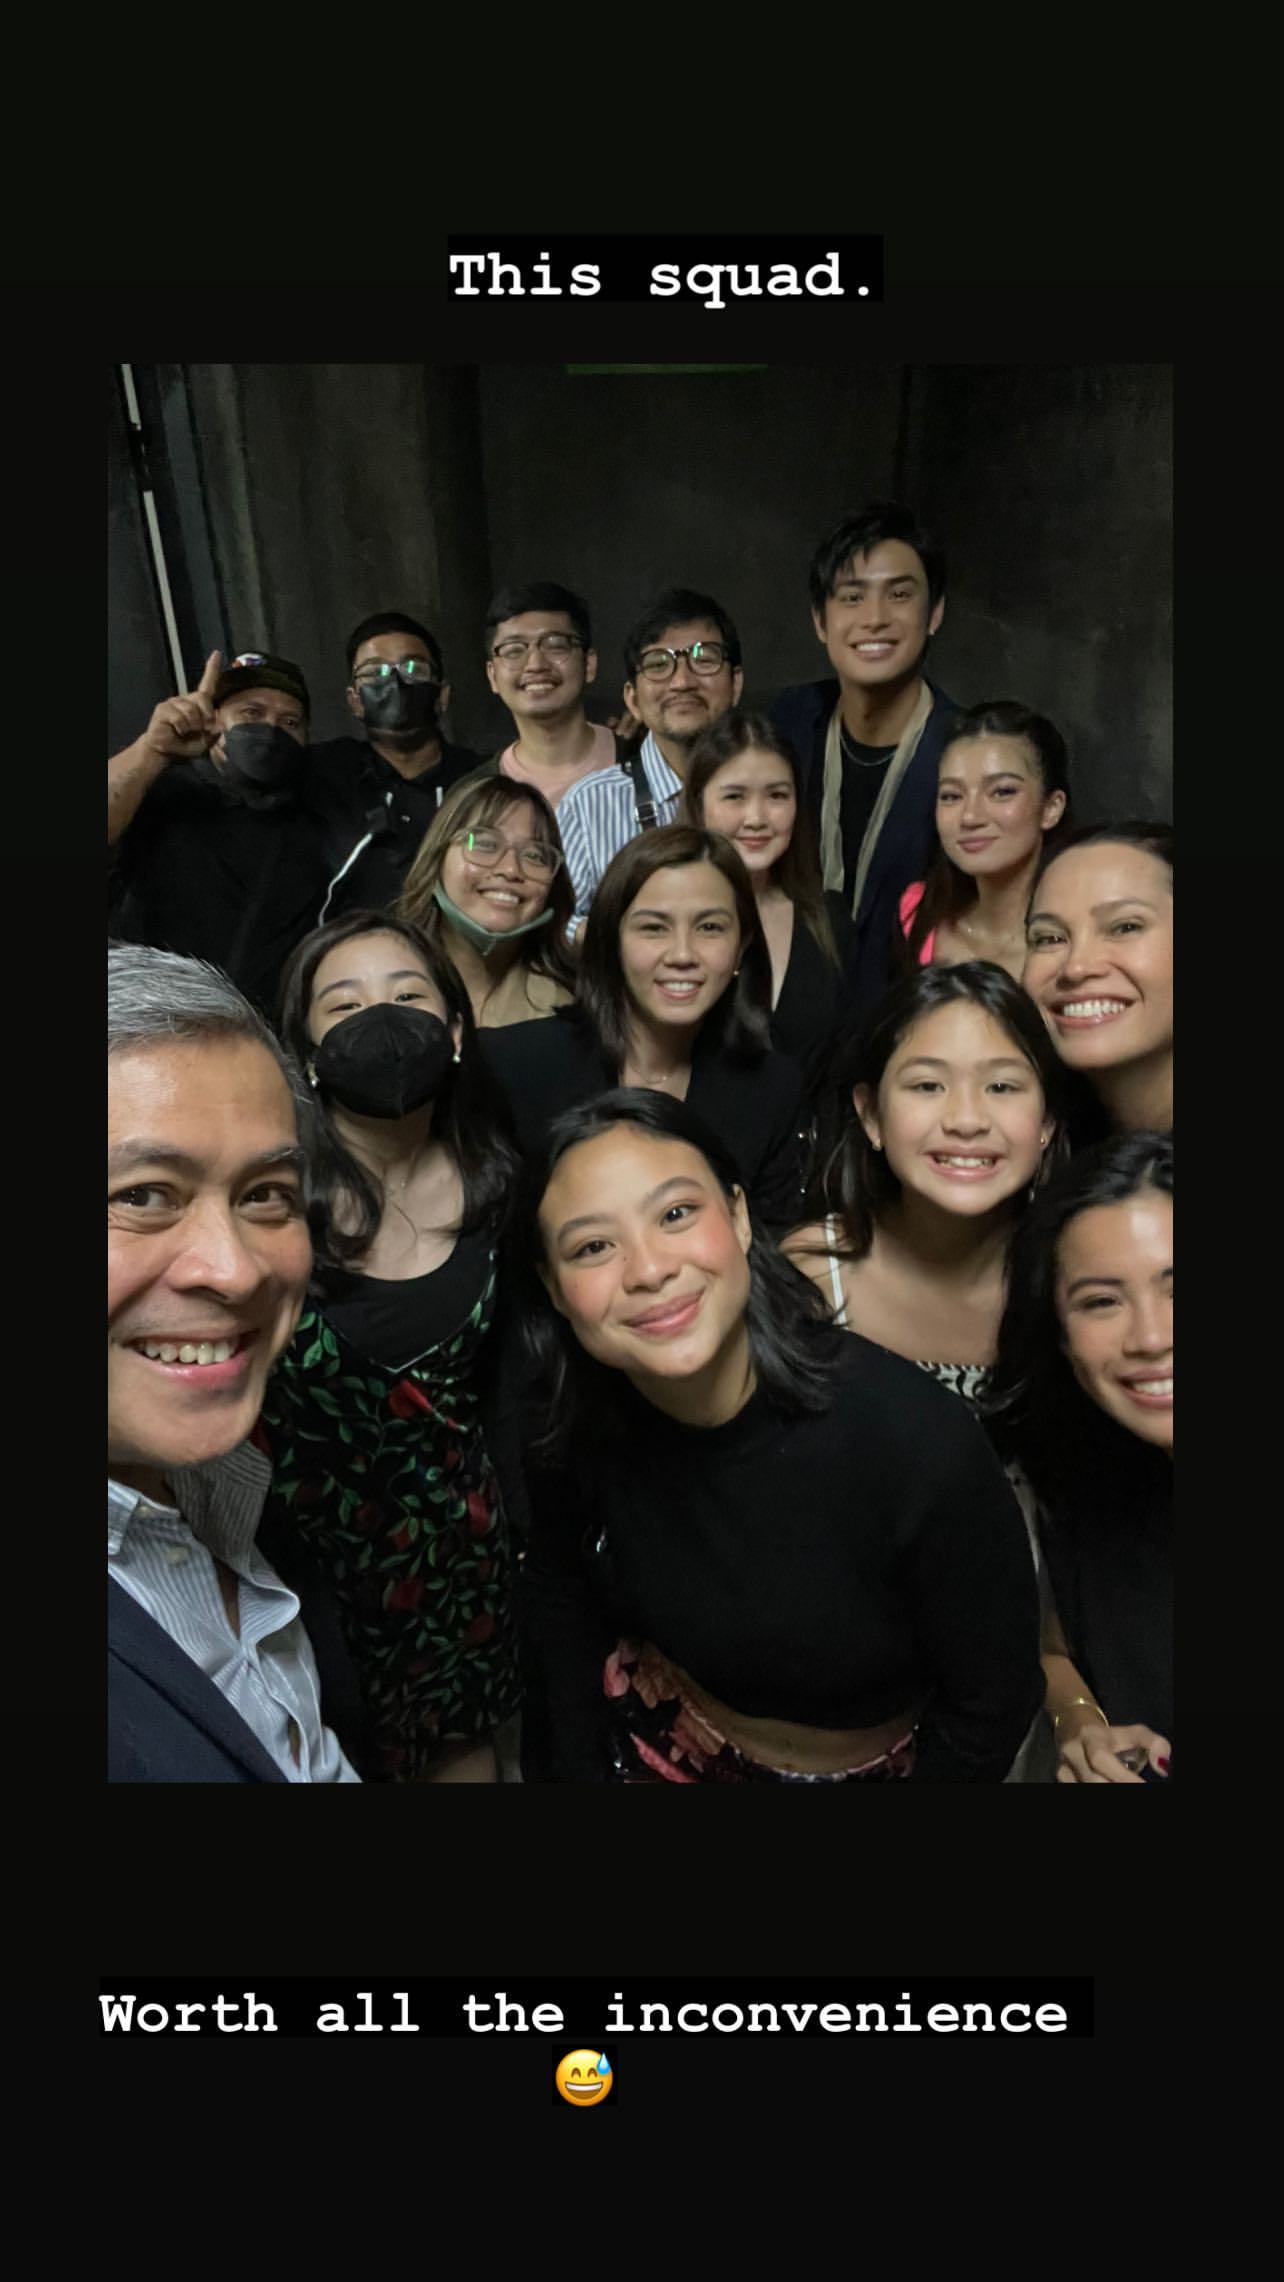 Donny Pangilinan and Belle Mariano, aka DonBelle and their families